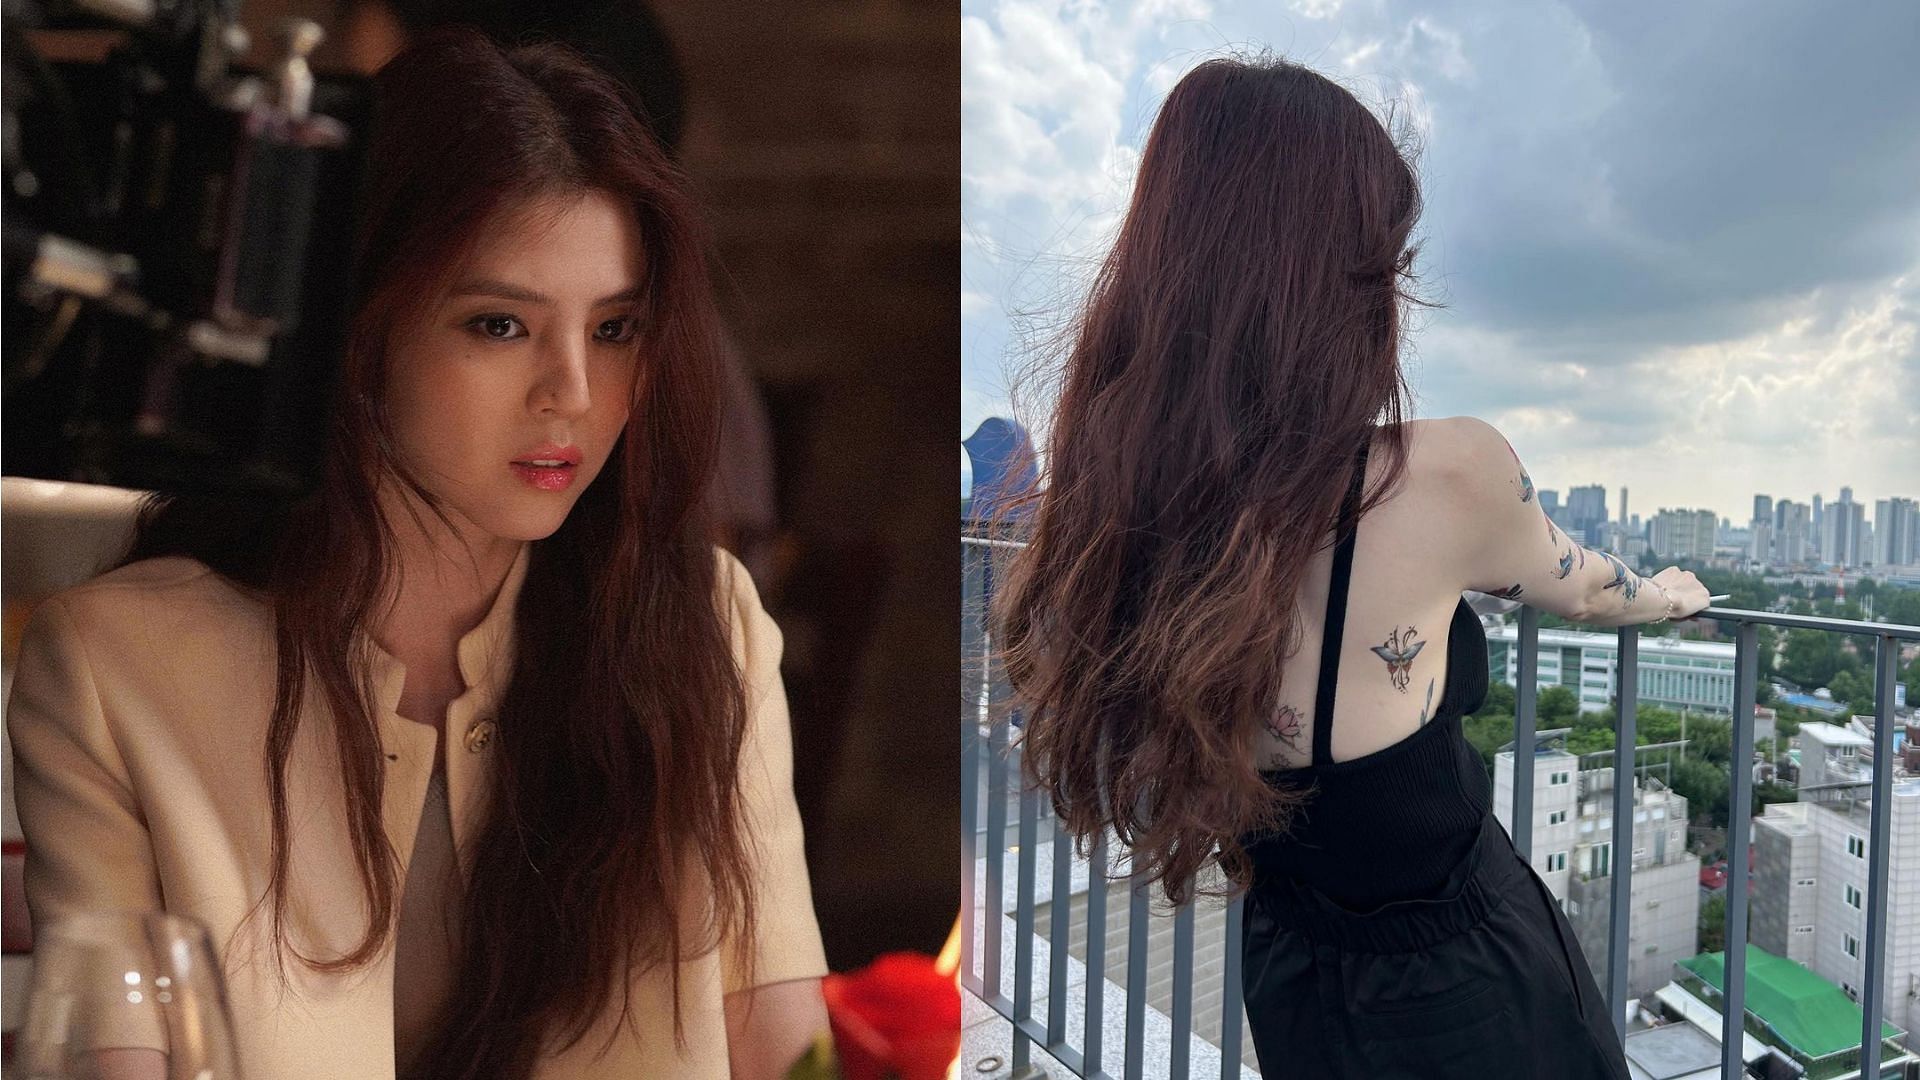 Han So-hee goes viral for posting a picture with an alleged cigarette (Images via Instagram/xeesoxee)